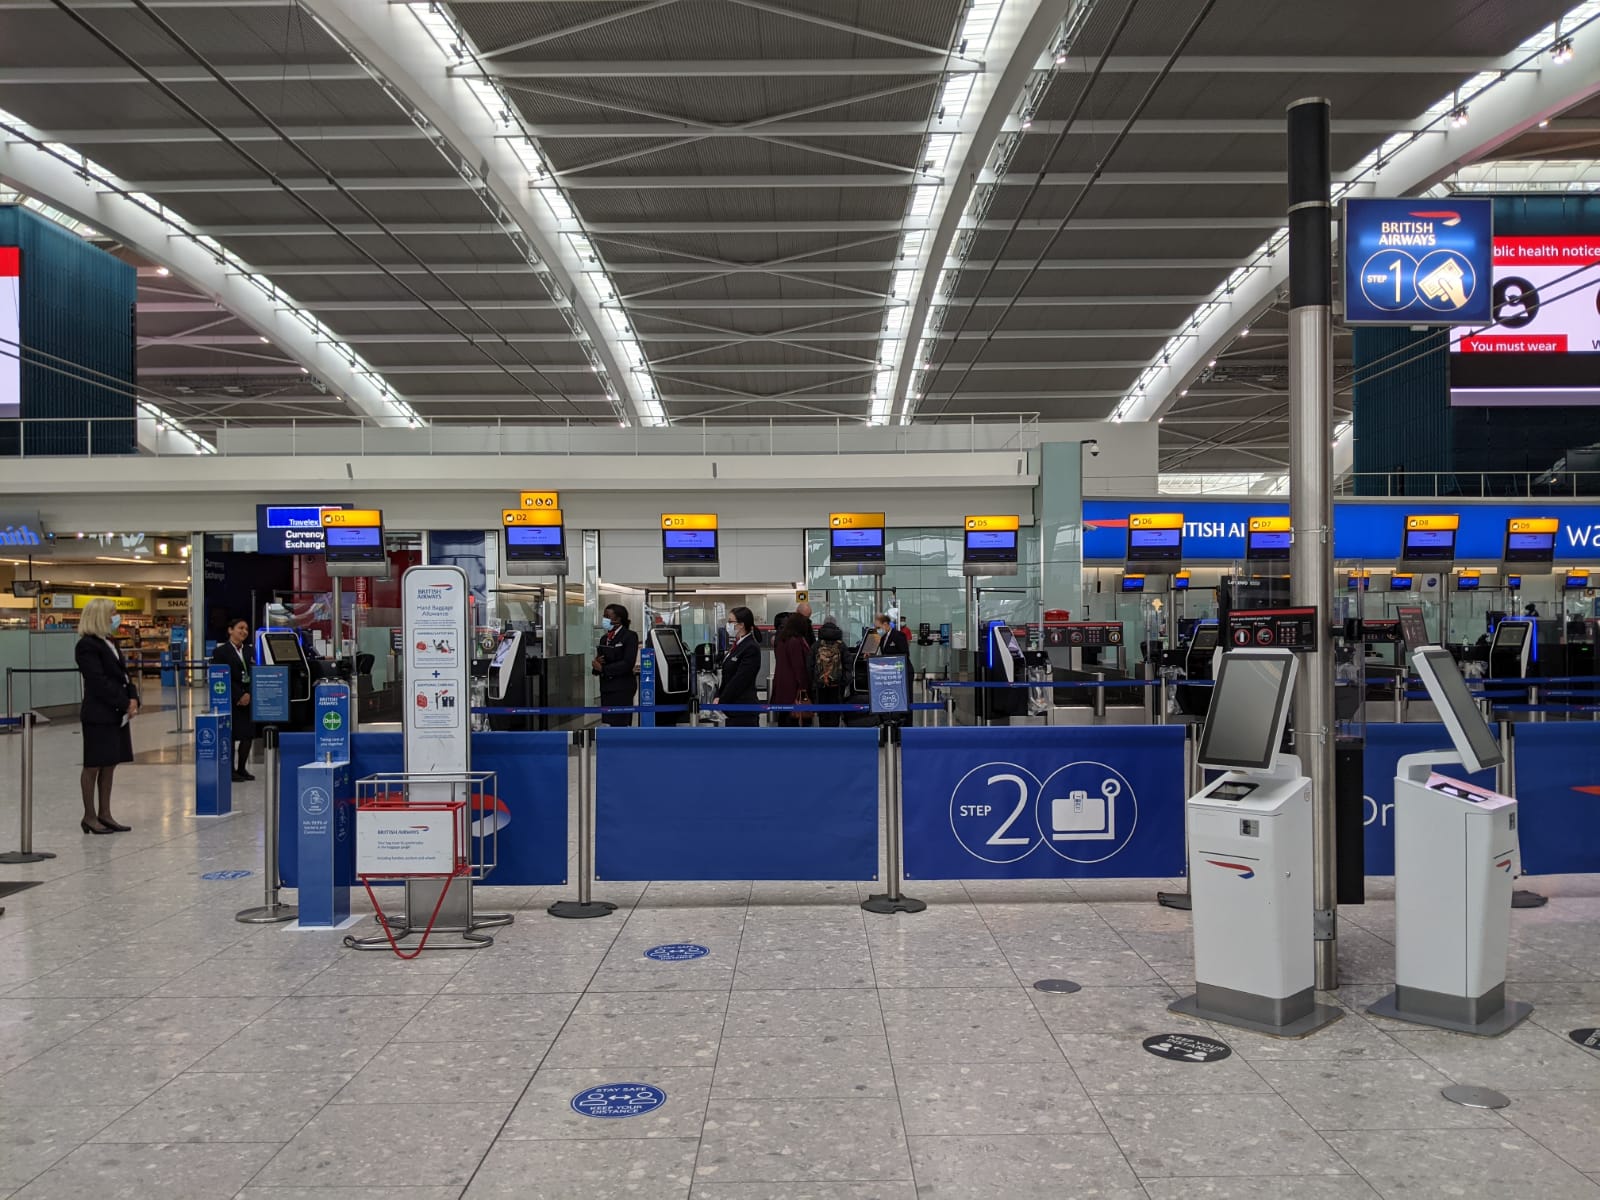 T5 check-in will look a bit busier from Monday